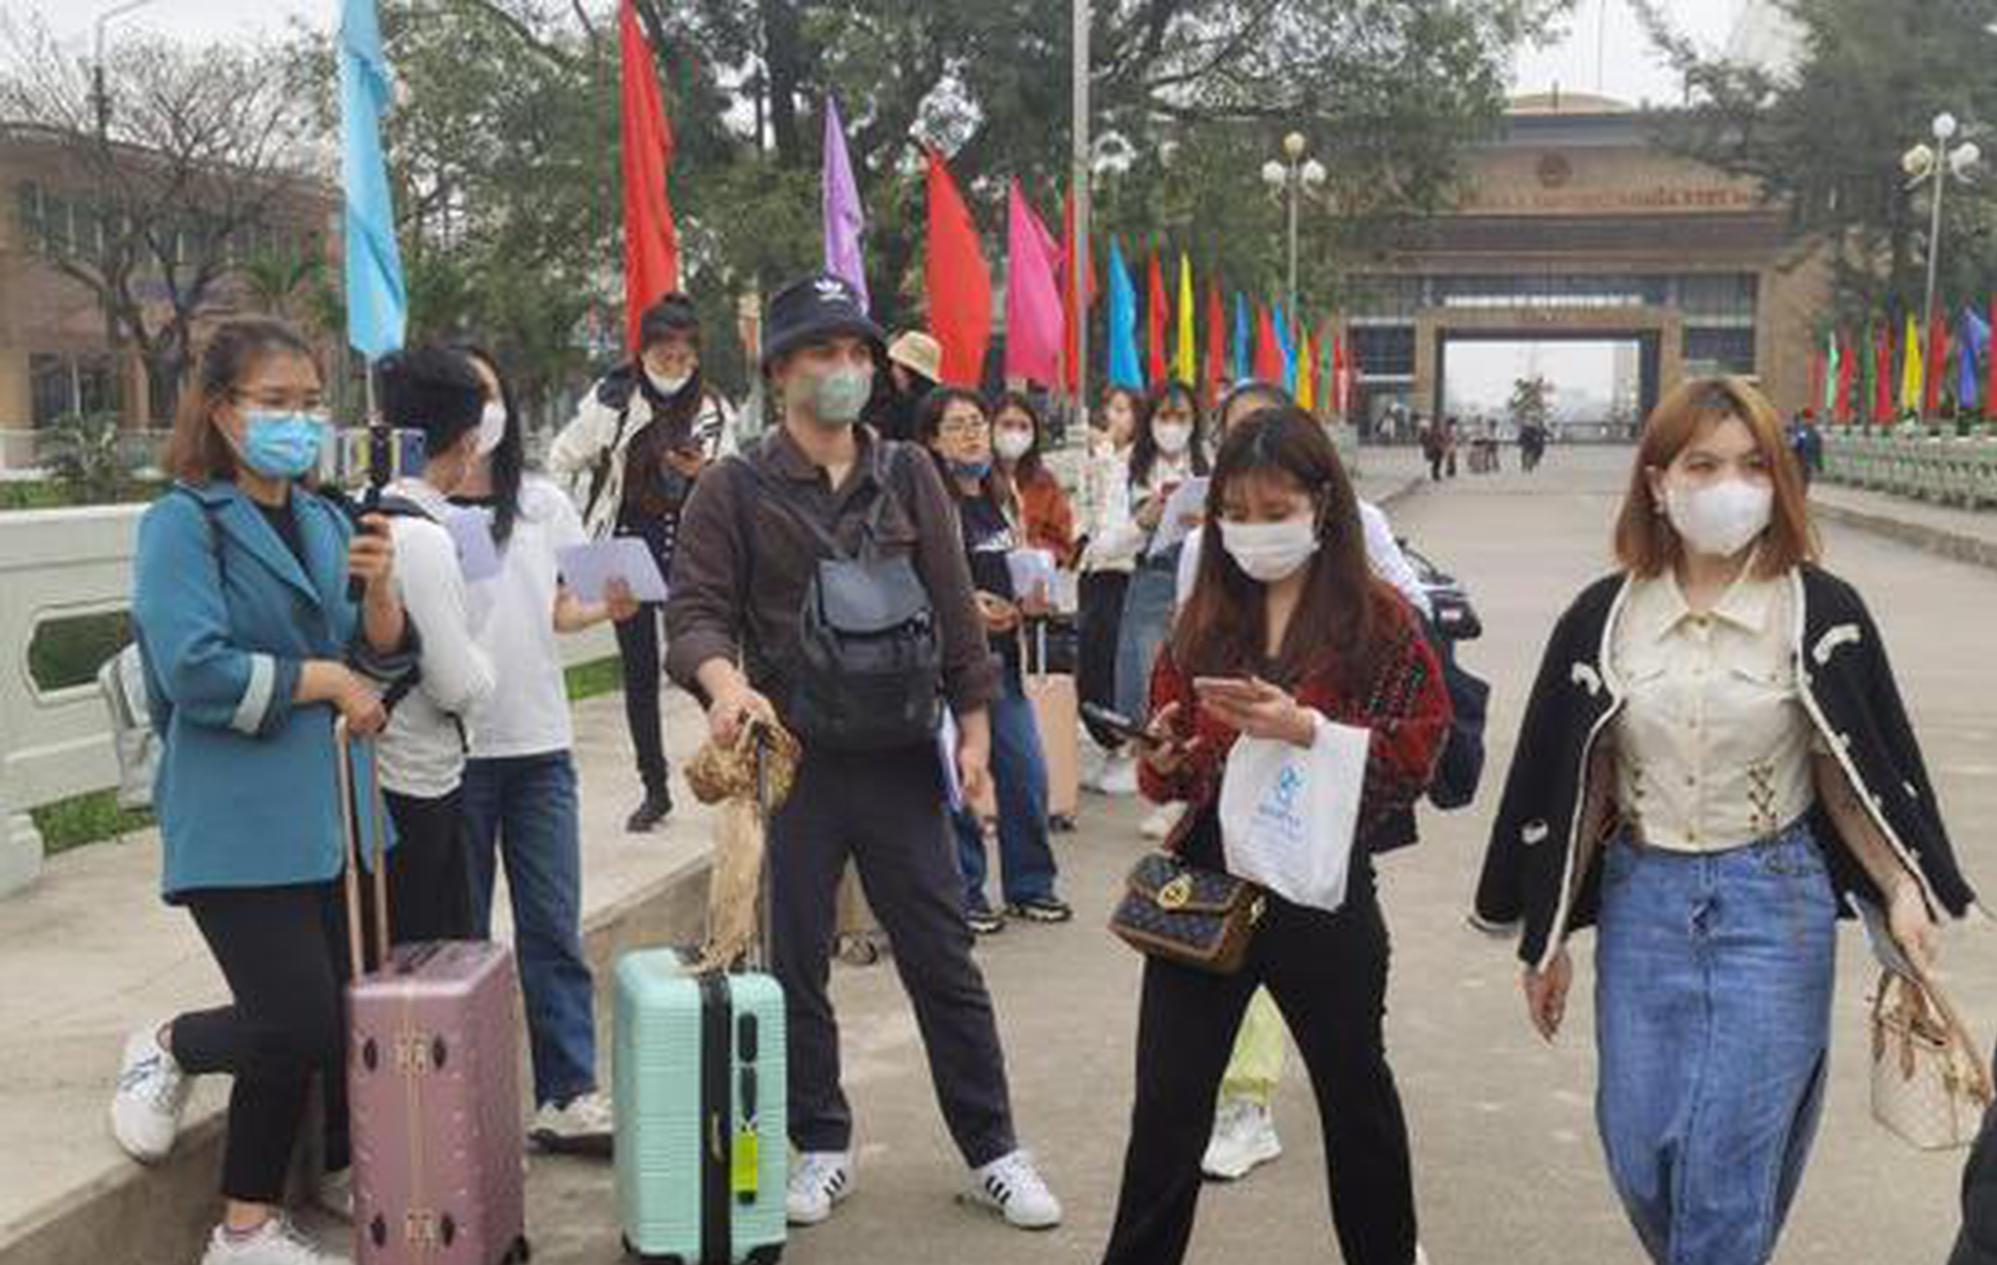 38 Chinese warmly welcomed in Vietnam as cross-border tourism resumes